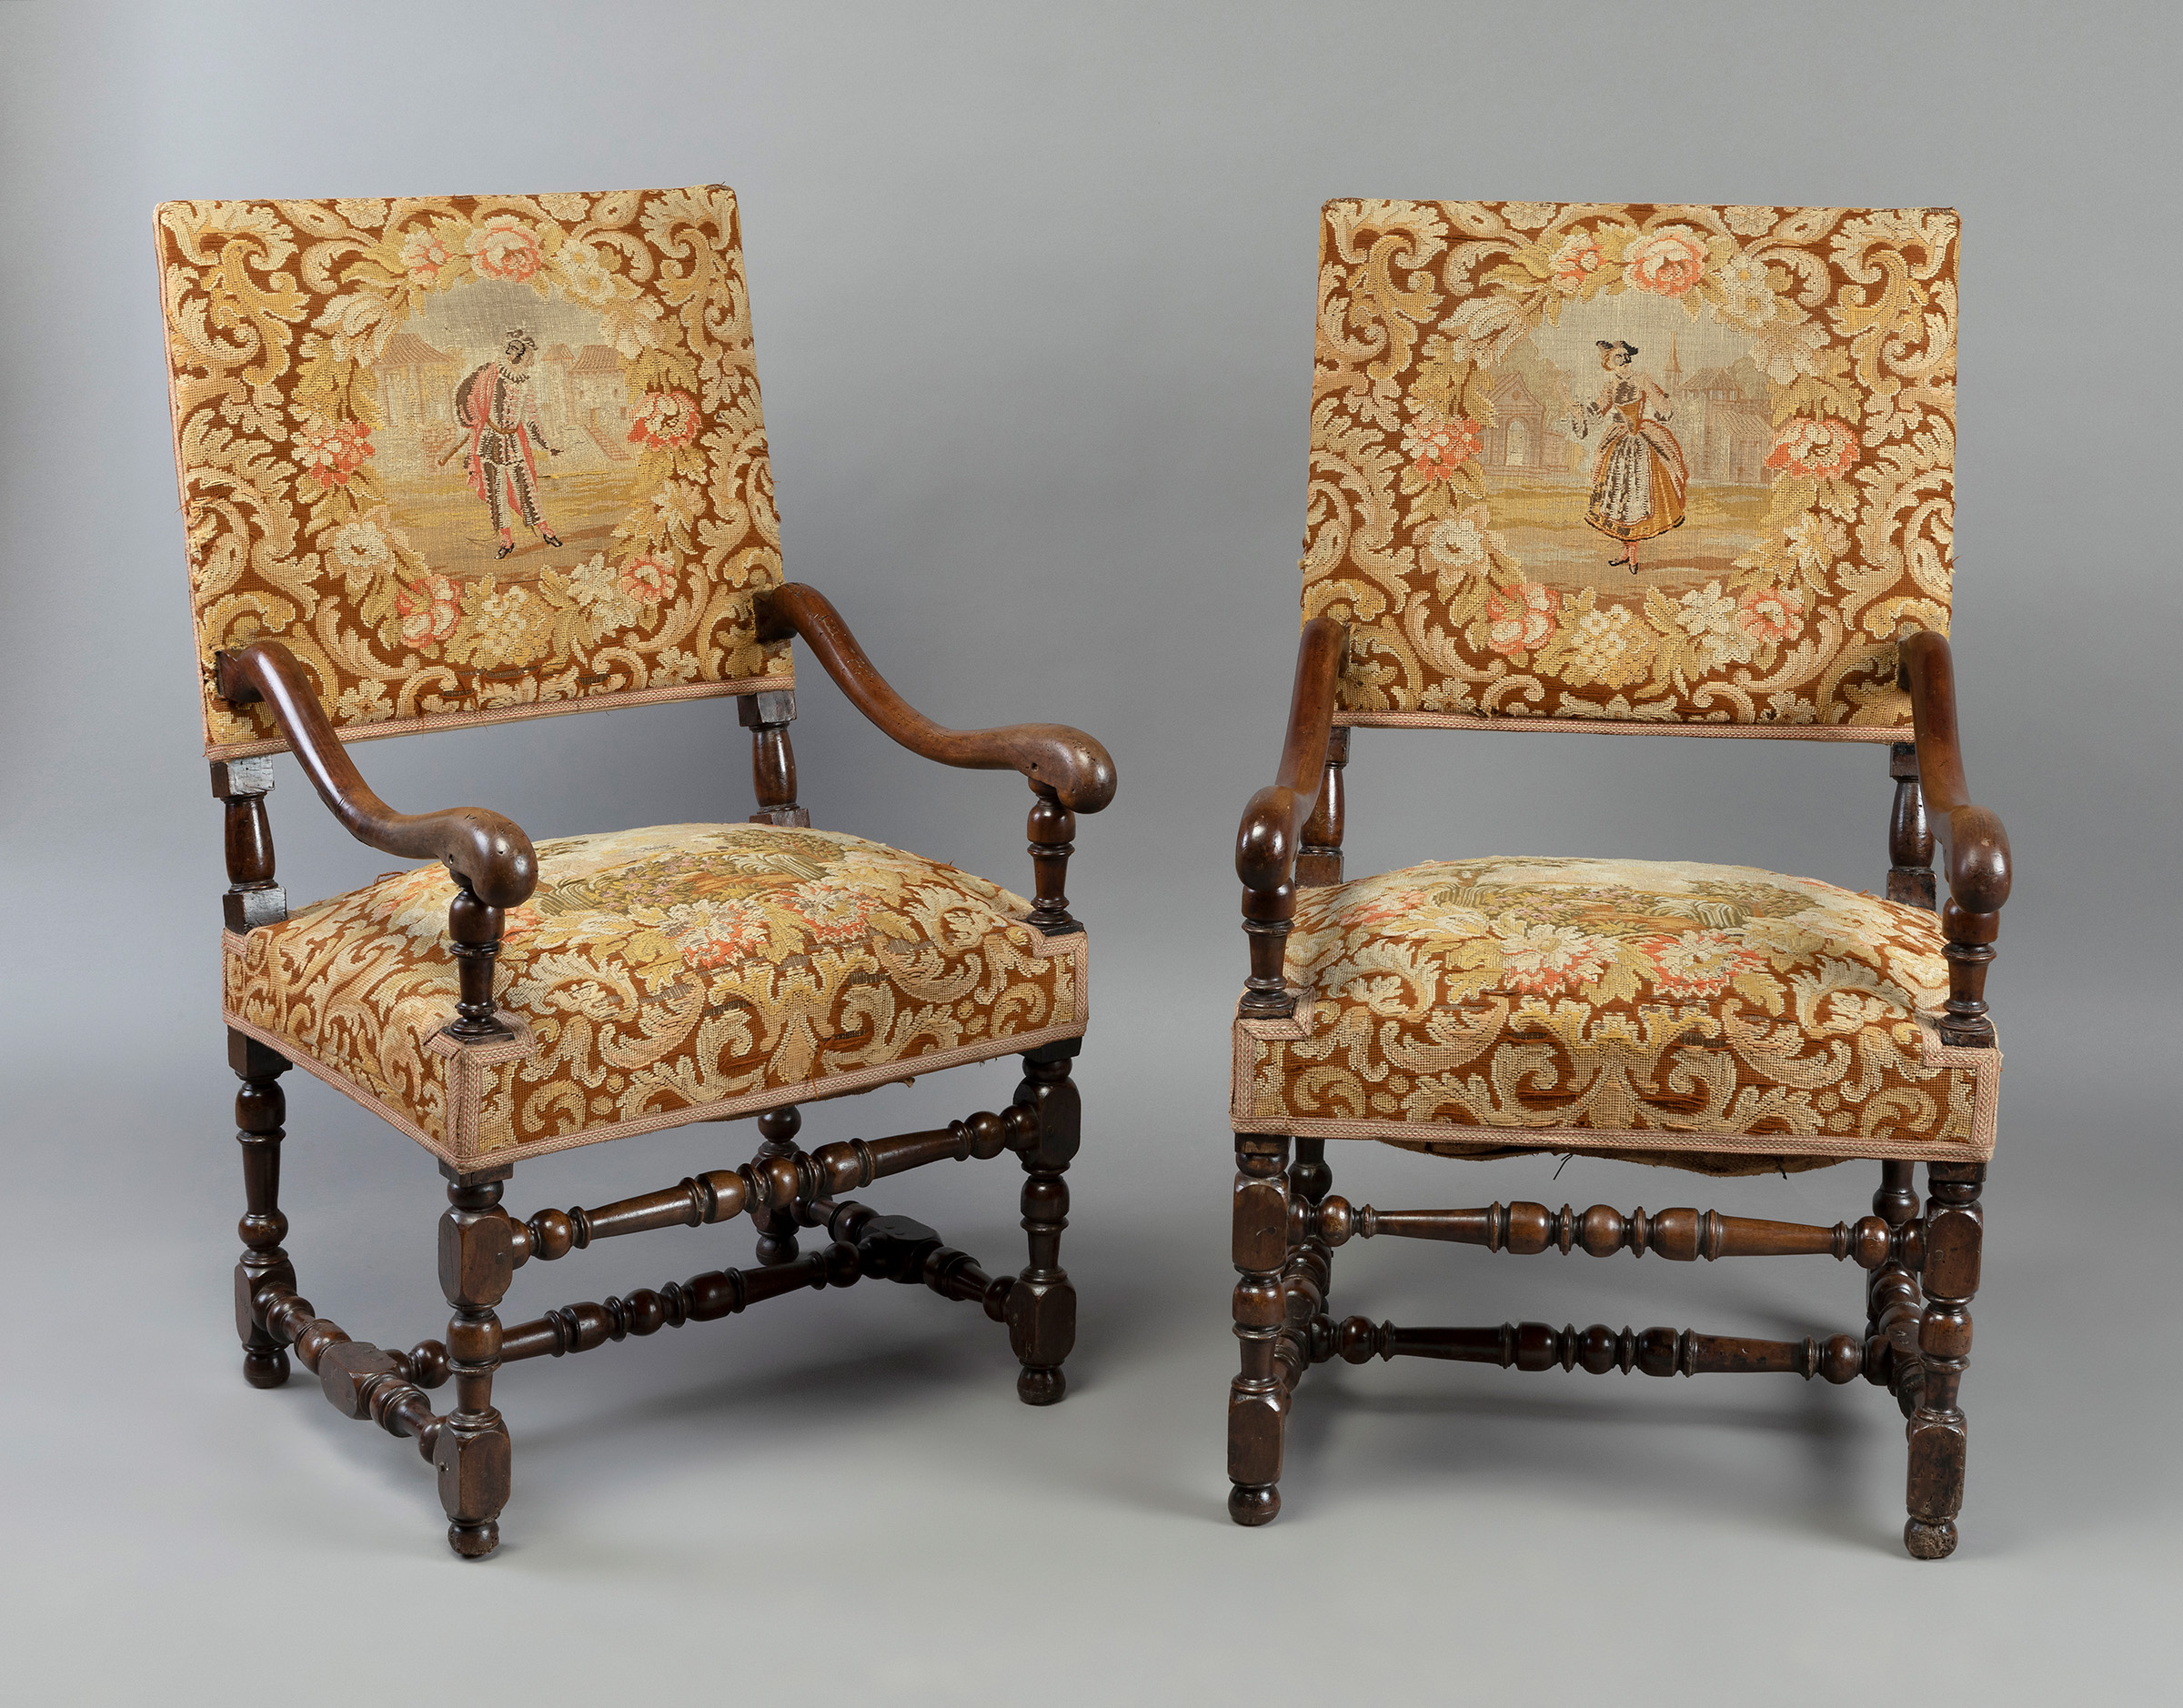 Pair of Louis XIV armchairs. France, 17th-18th century.Walnut wood and petit point upholstery.Use